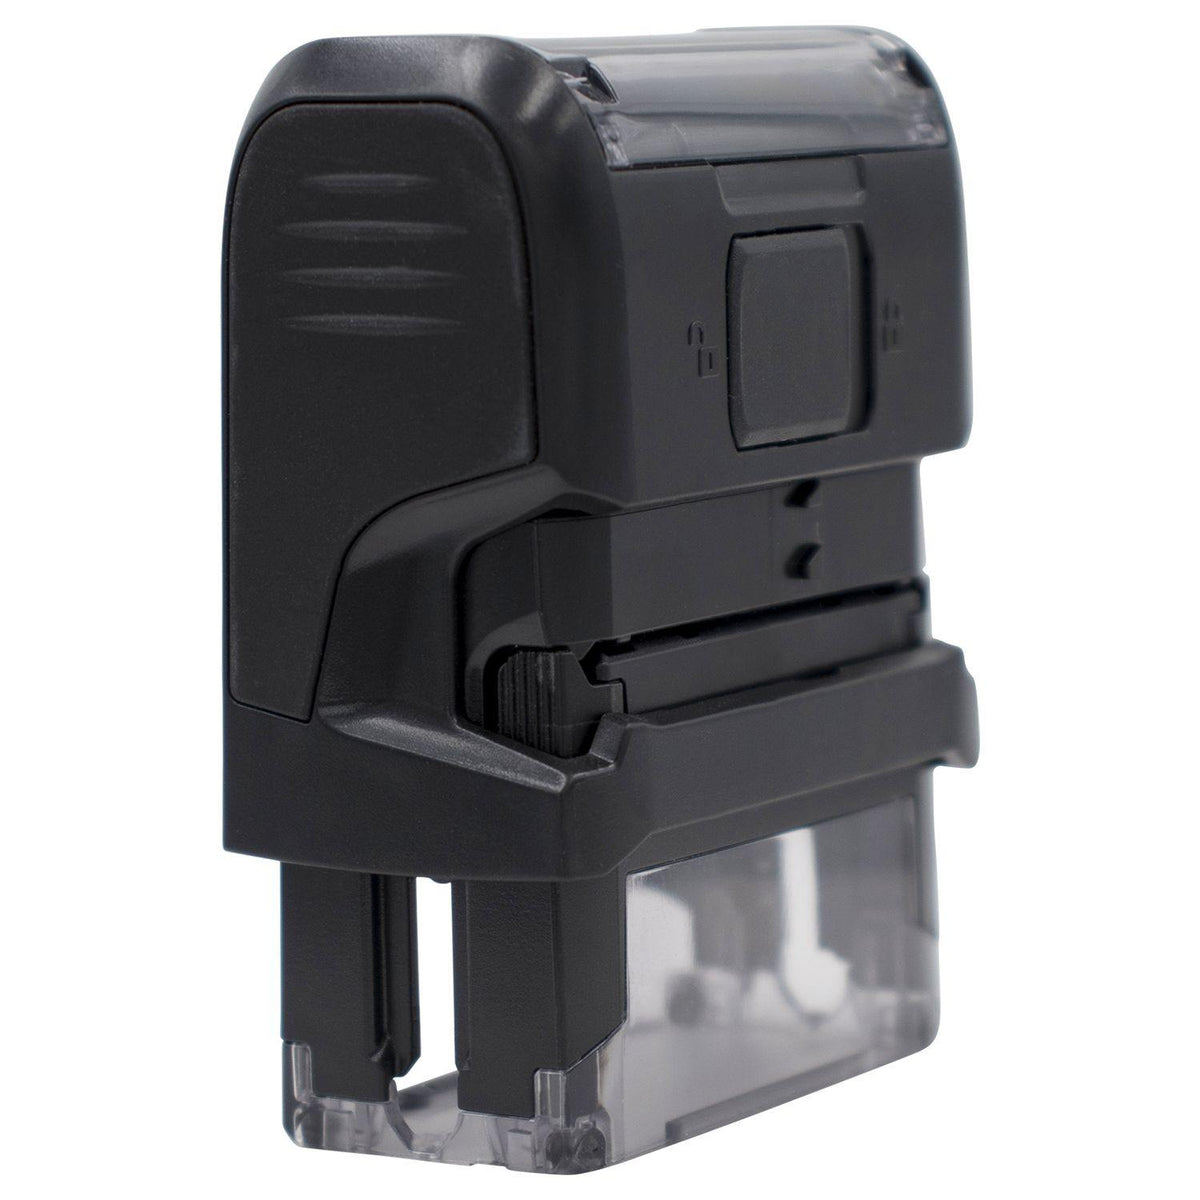 Self-Inking Economy Rate Stamp - Engineer Seal Stamps - Brand_Trodat, Impression Size_Small, Stamp Type_Self-Inking Stamp, Type of Use_Postal, Type of Use_Shipping &amp; Receiving